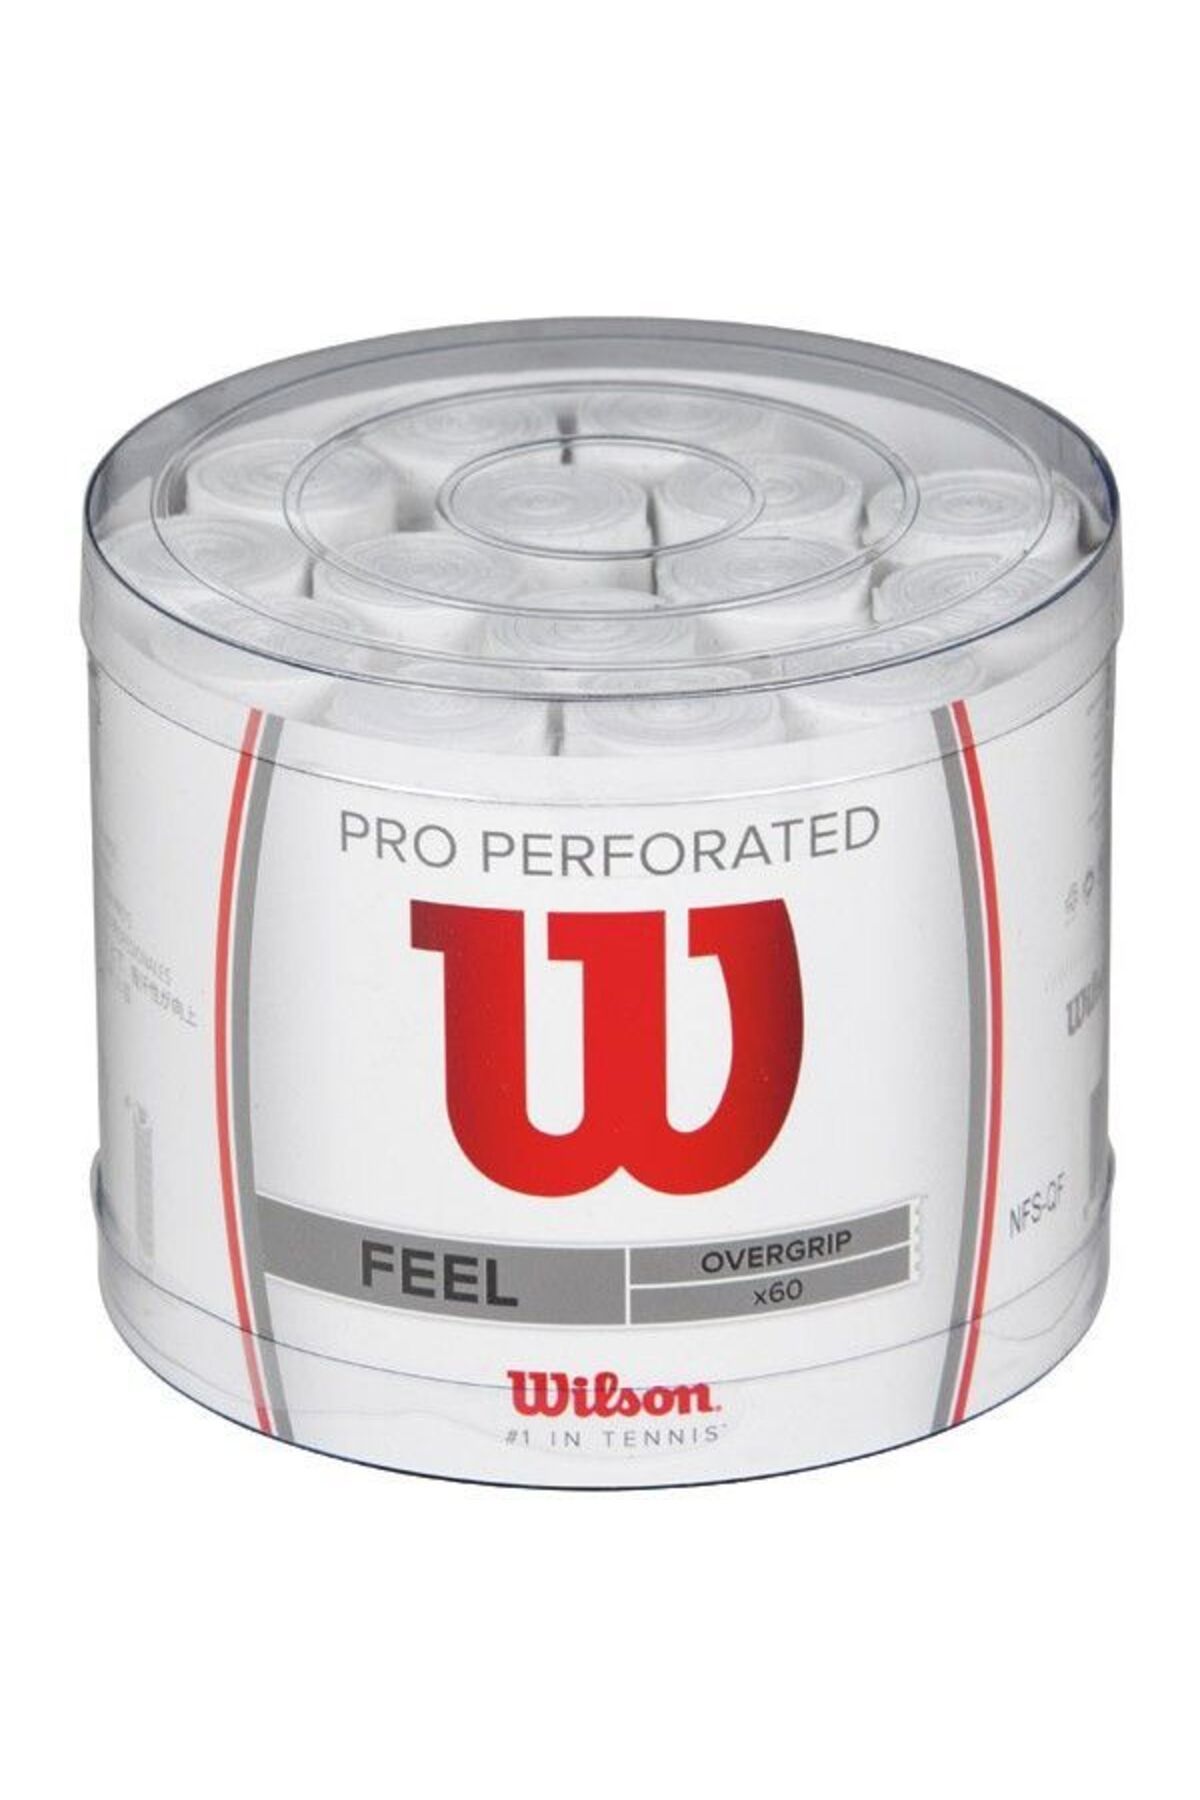 Wilson Pro Perforated Feel 60'lı Overgrip Wrz4008wh